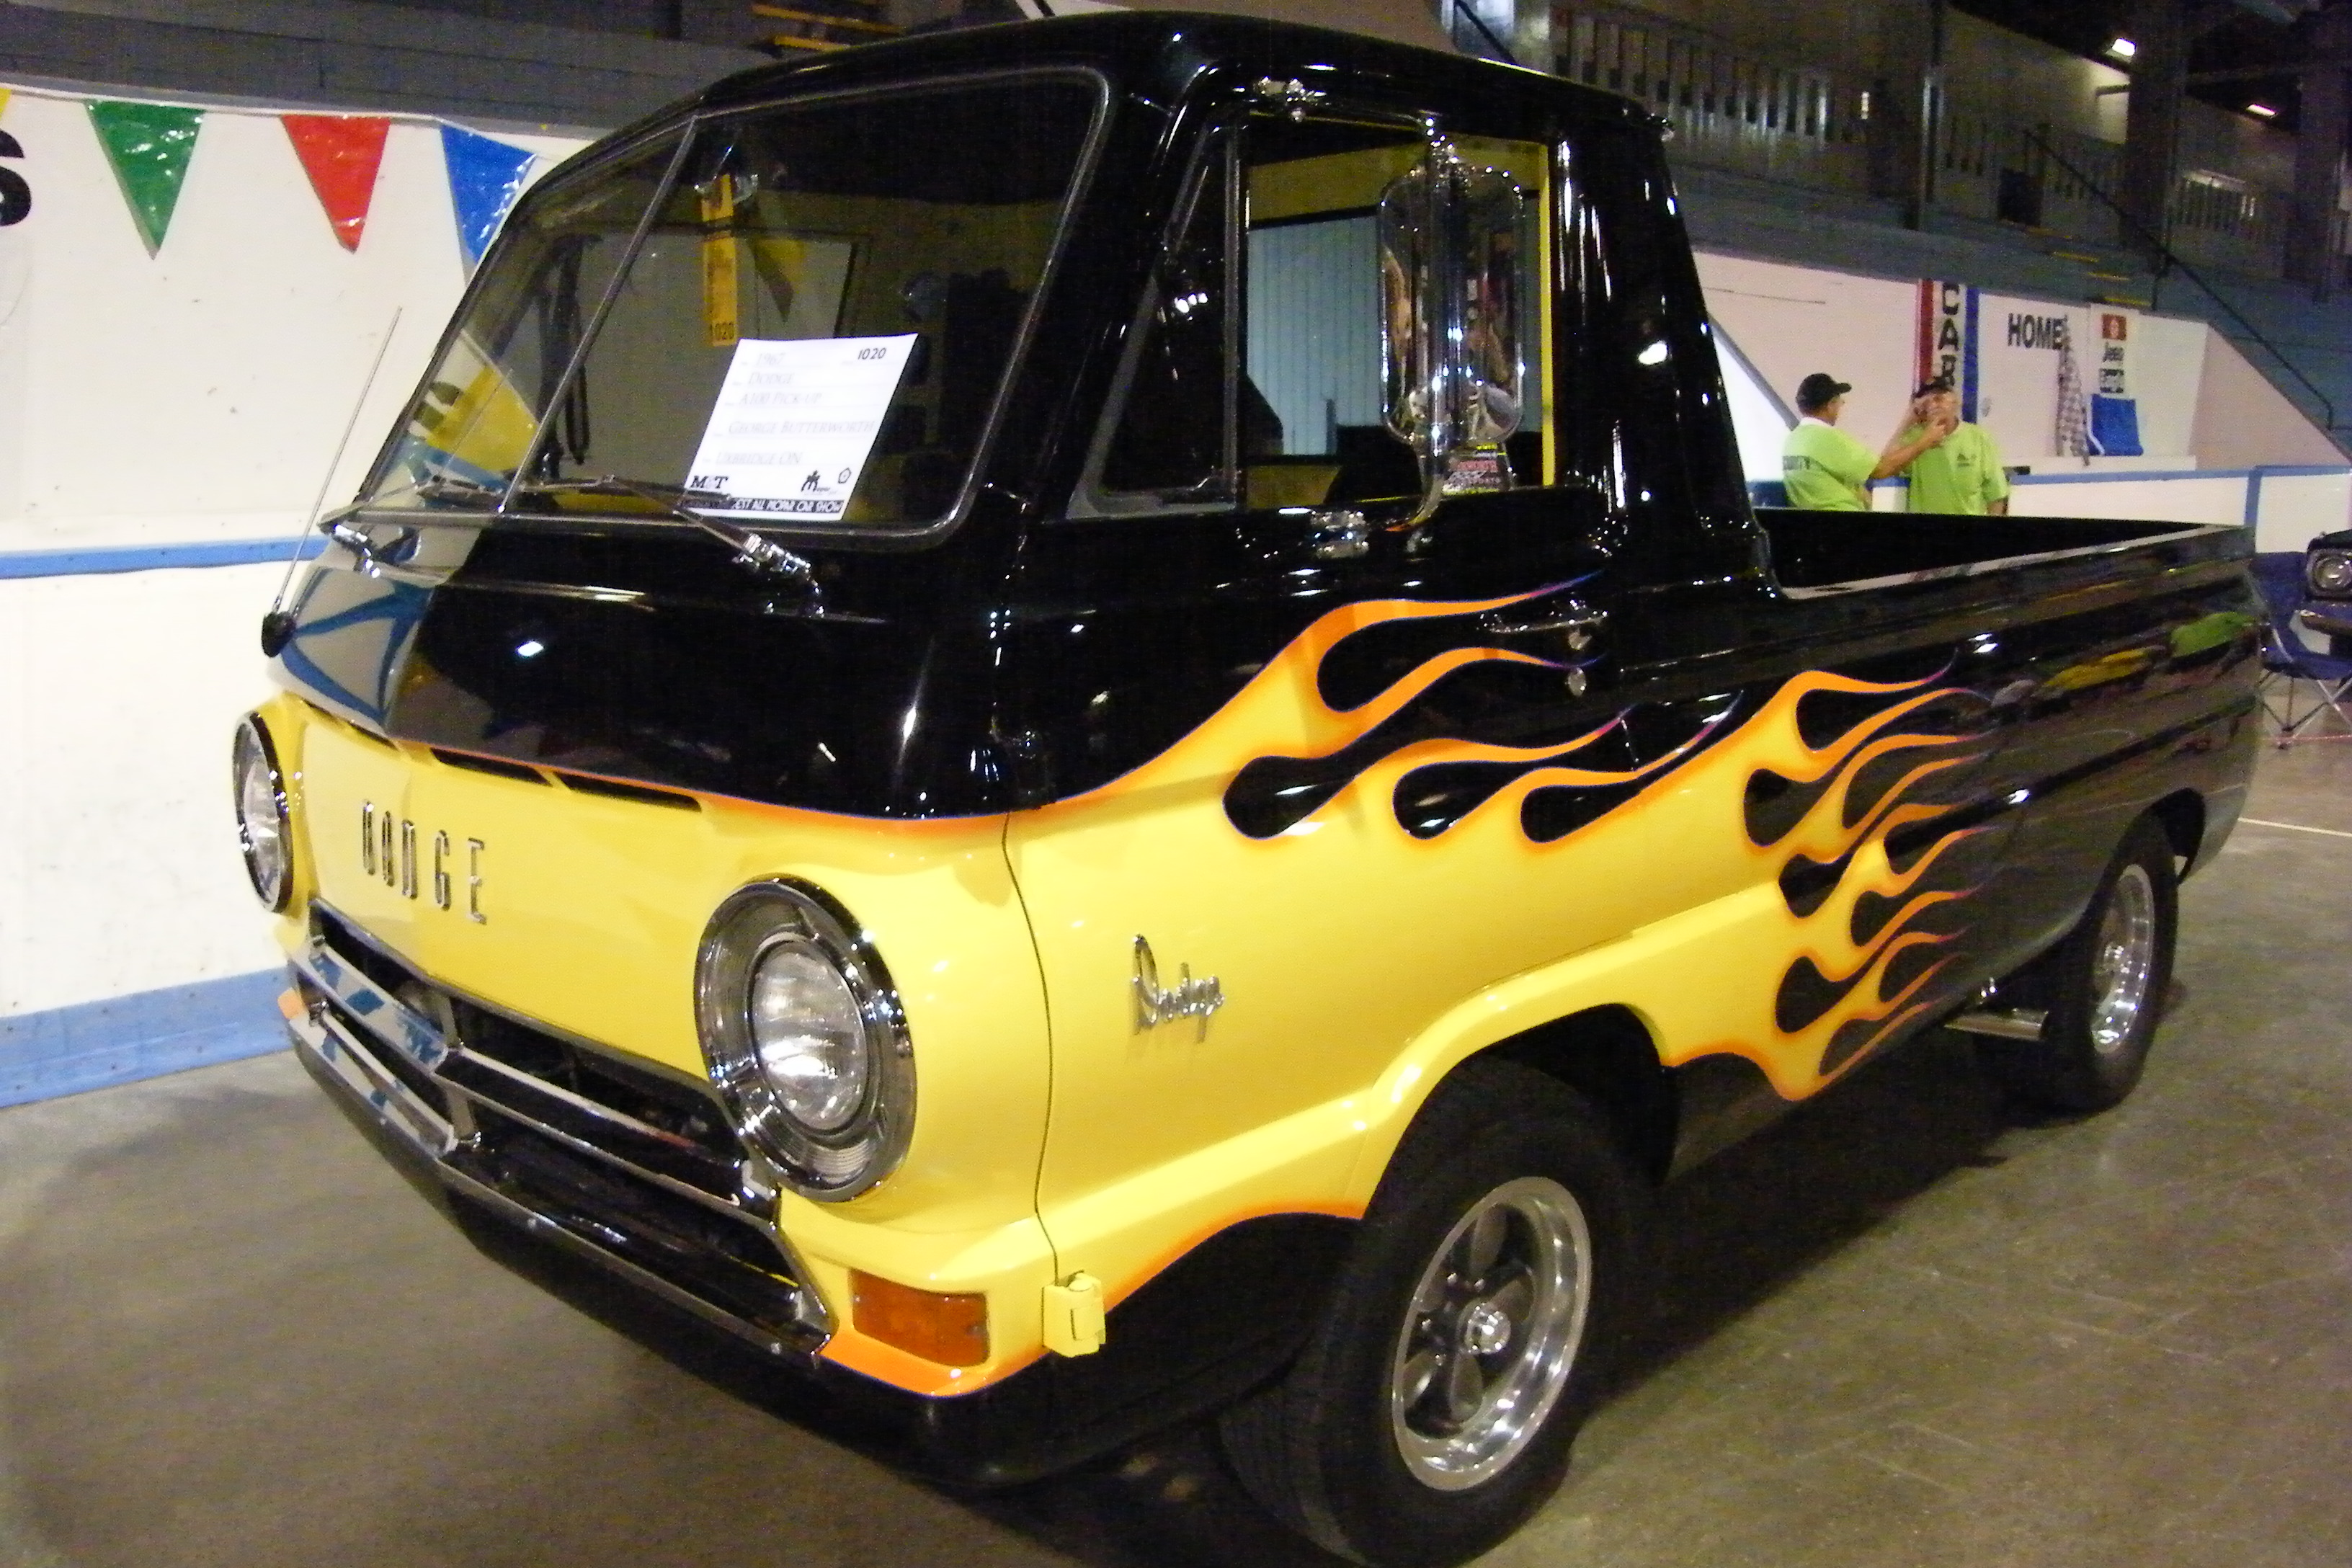 67 Dodge A100 Pick-Up | Flickr - Photo Sharing!